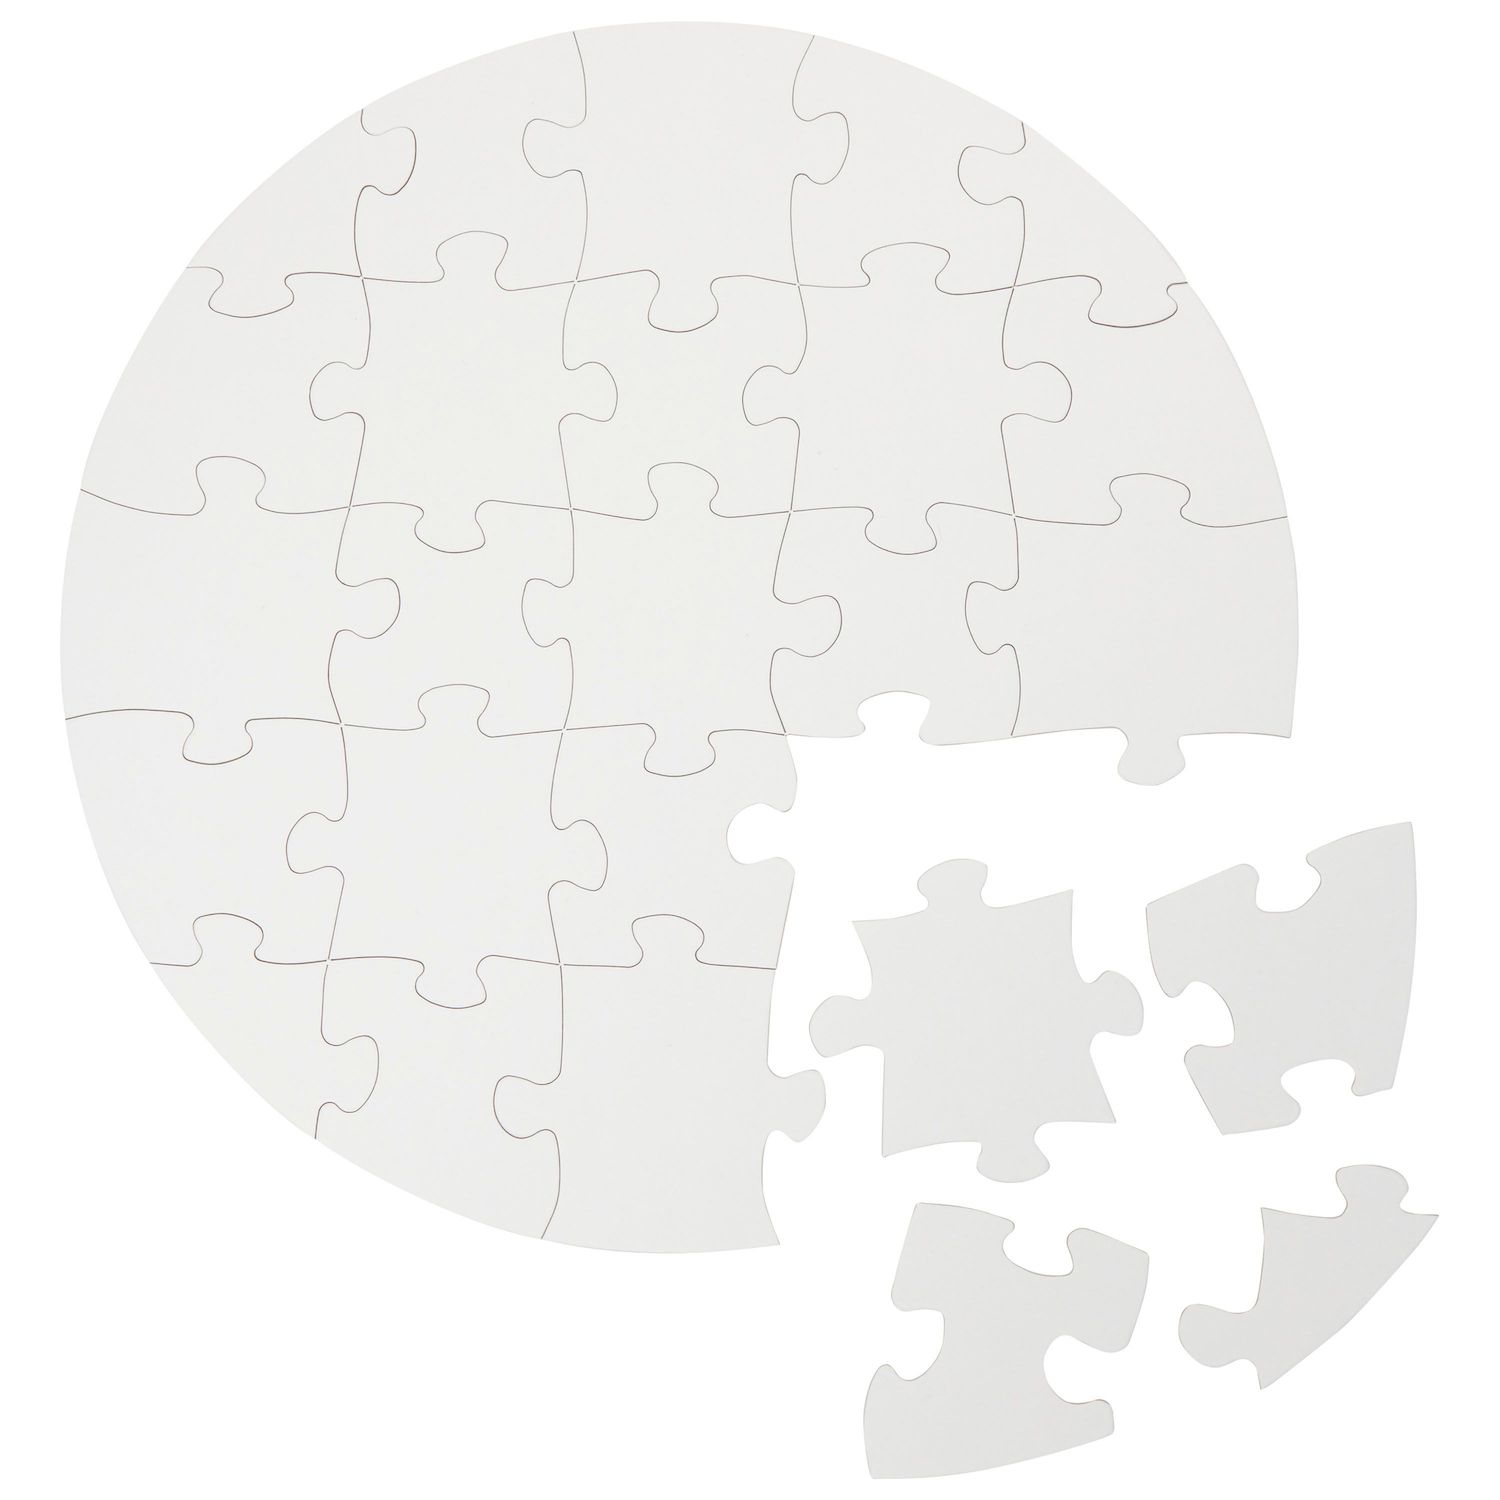 Juvale Blank Puzzle - 36-Pack White Jigsaw Puzzles for DIY, Kids